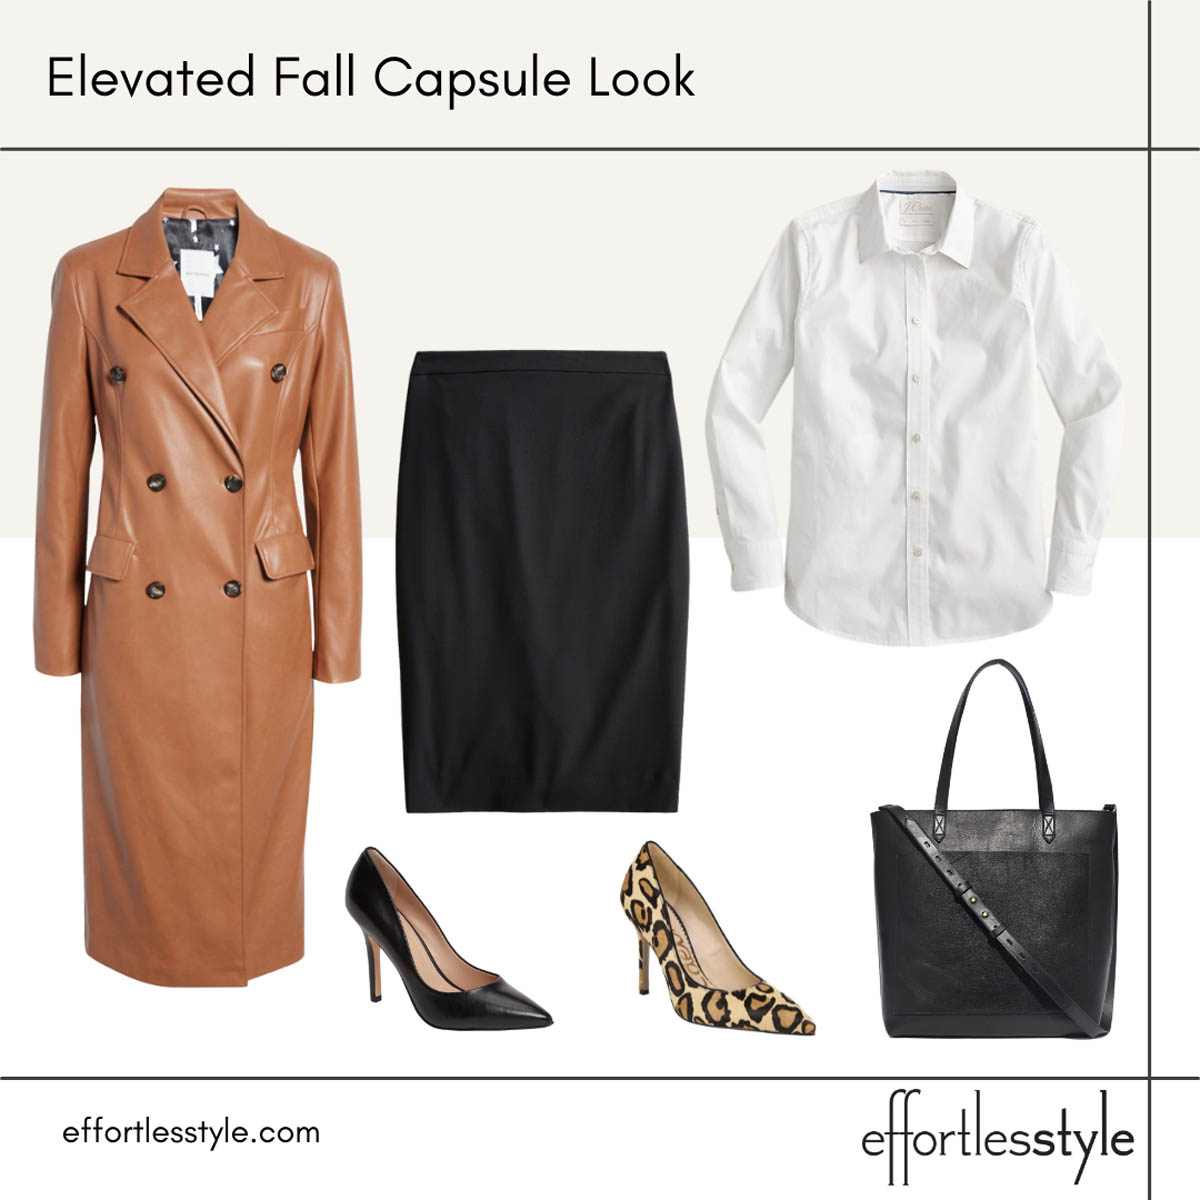 Faux Leather Trench and Pencil Skirt Look What to Wear to the Office